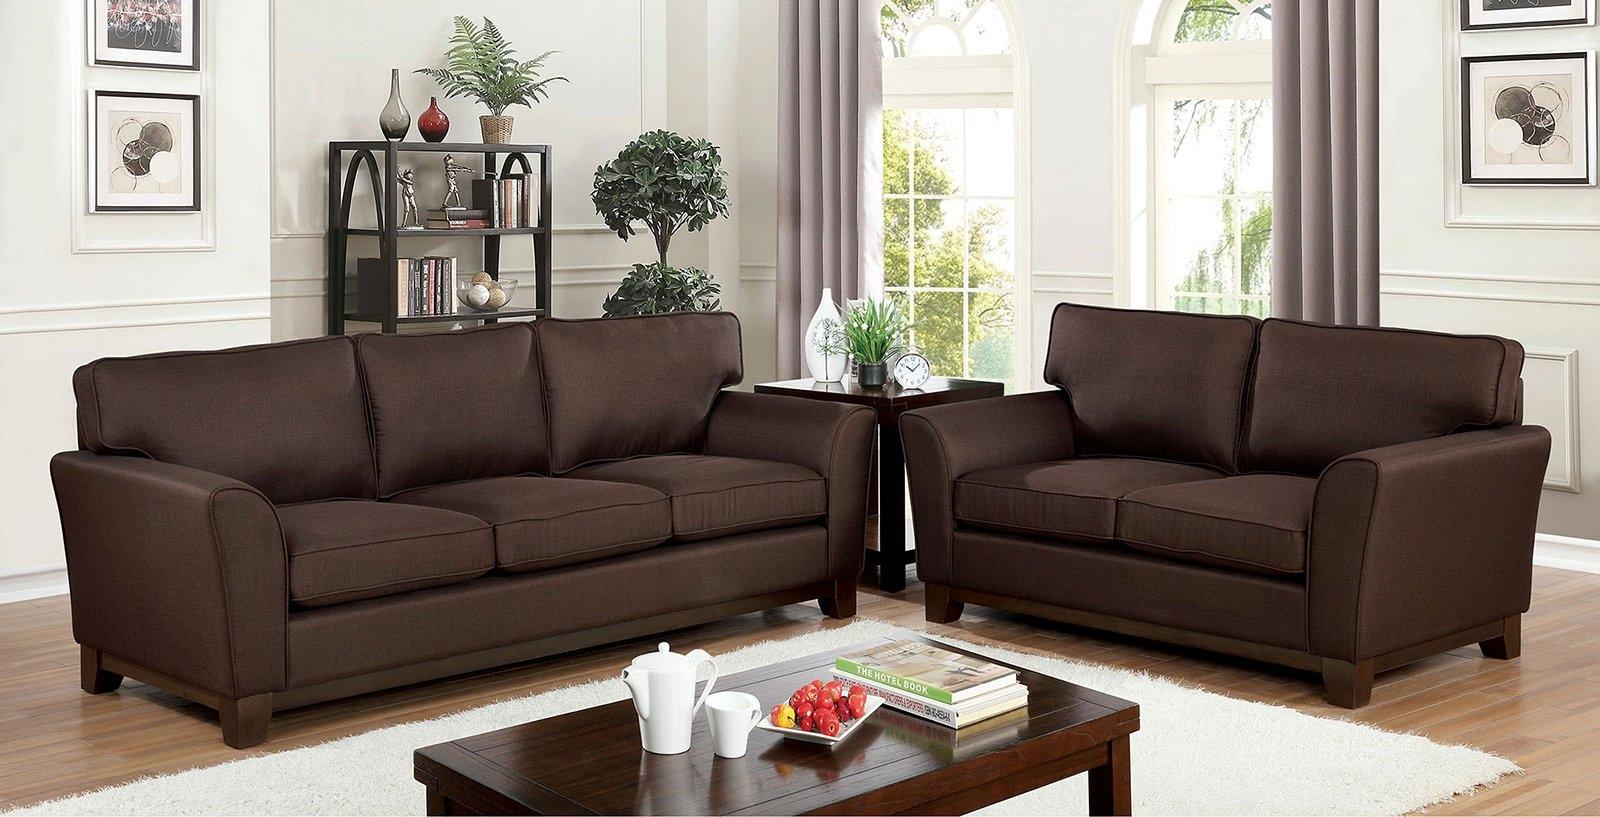 Transitional Sofa Loveseat and Chair Set CM6954BR-3PC Caldicot CM6954BR-3PC in Brown Chenille